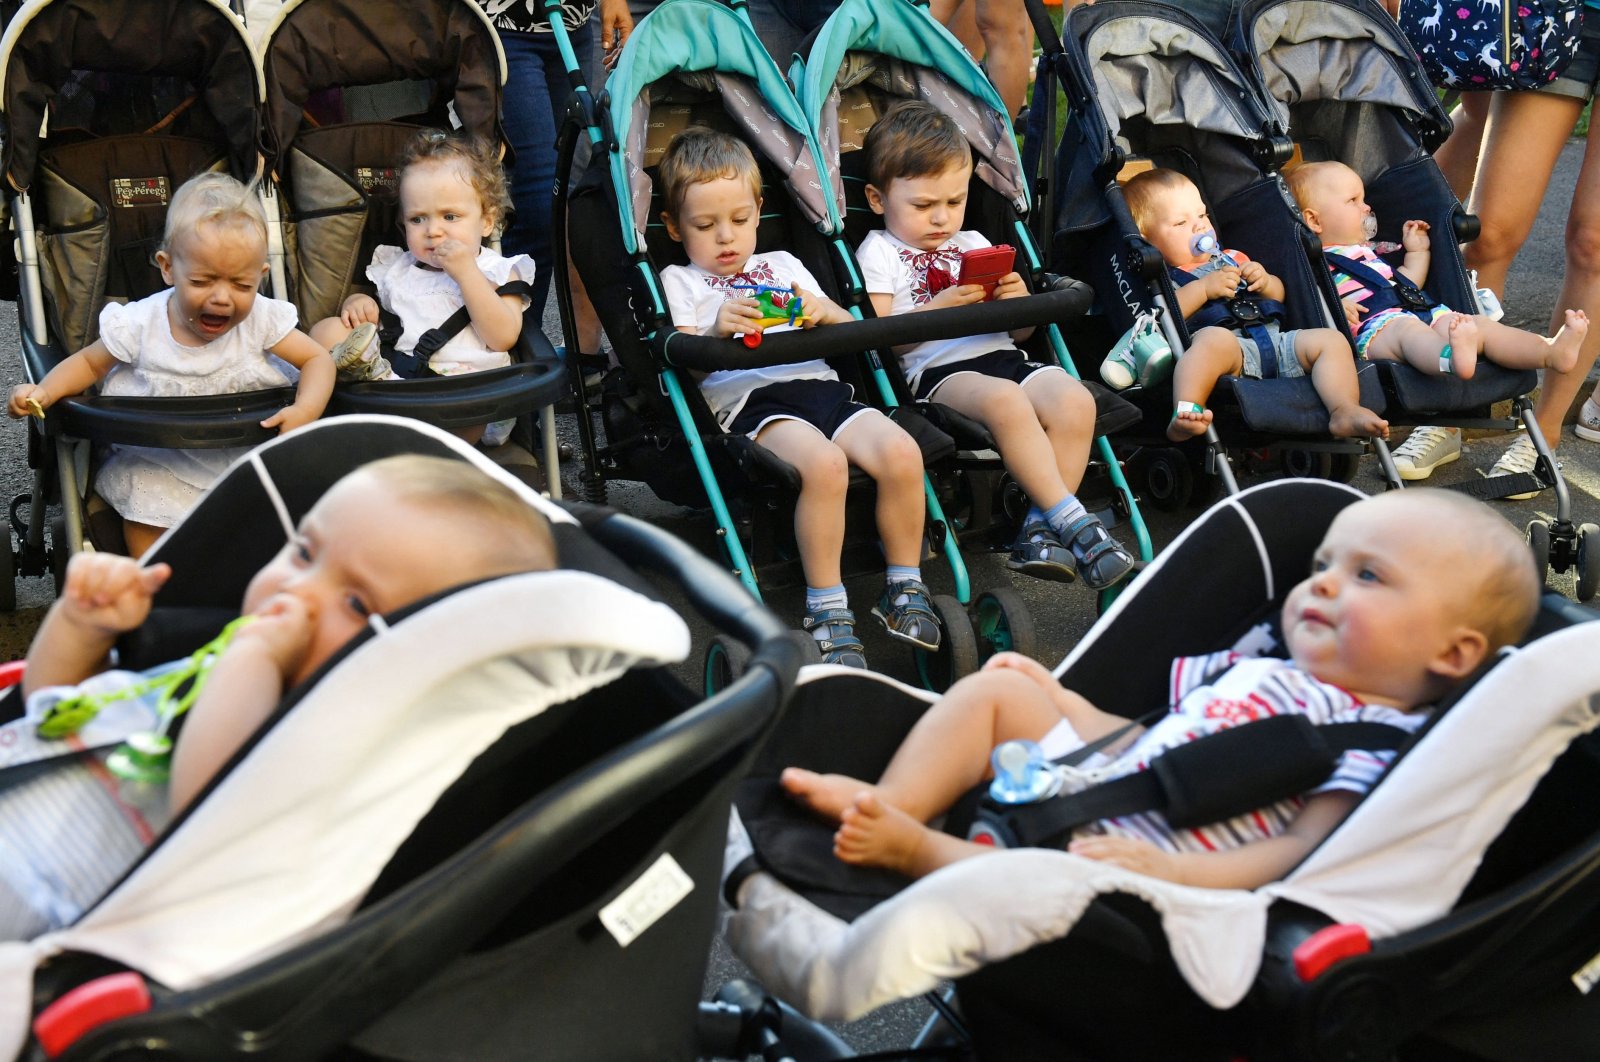 Twins and triplets sit in their stroller as they arrive for the children's Festival Of Twins, in Kyiv, Ukraine, Aug. 11, 2018. (AFP Photo)